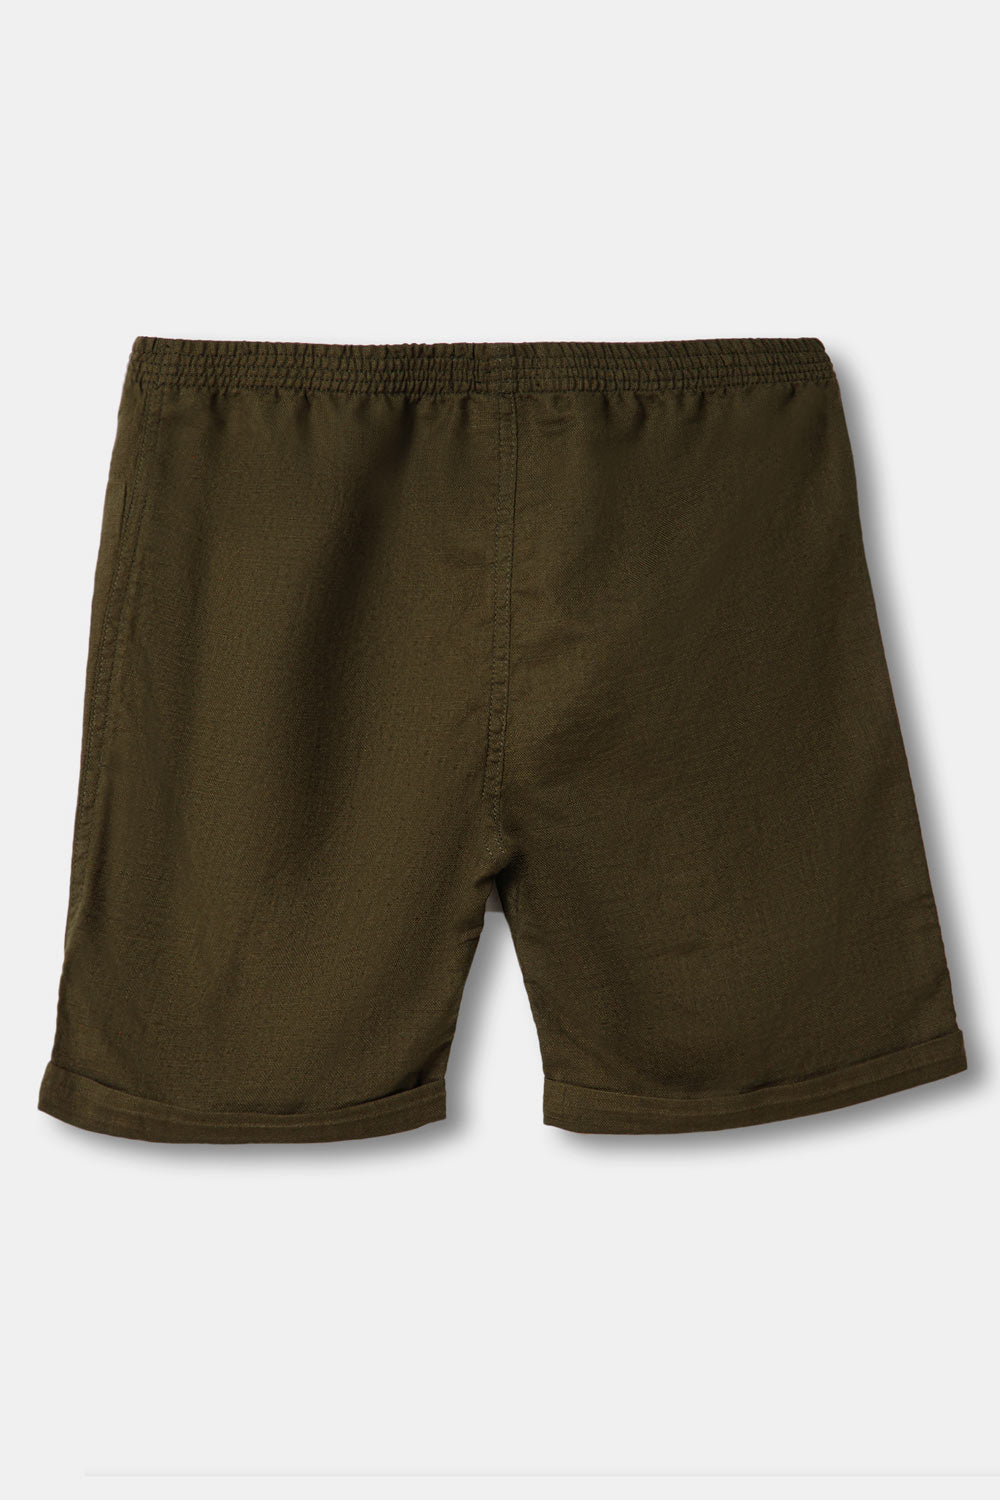 The Young Future  Shorts for Boys  - Olive Green  - BS04